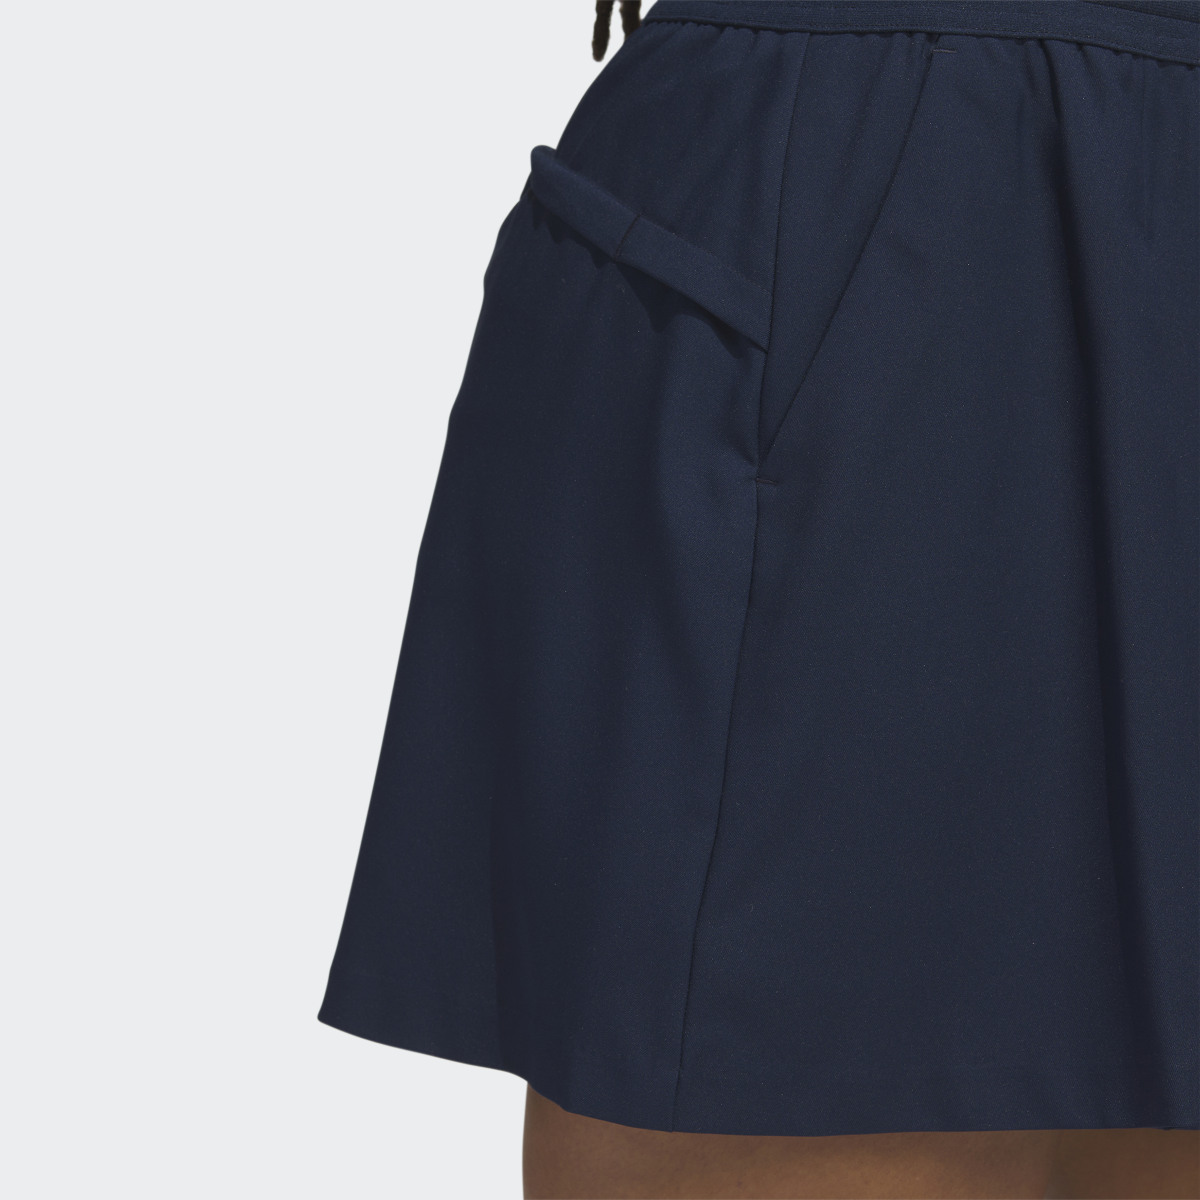 Adidas Made To Be Remade Flare Golf Skirt. 8